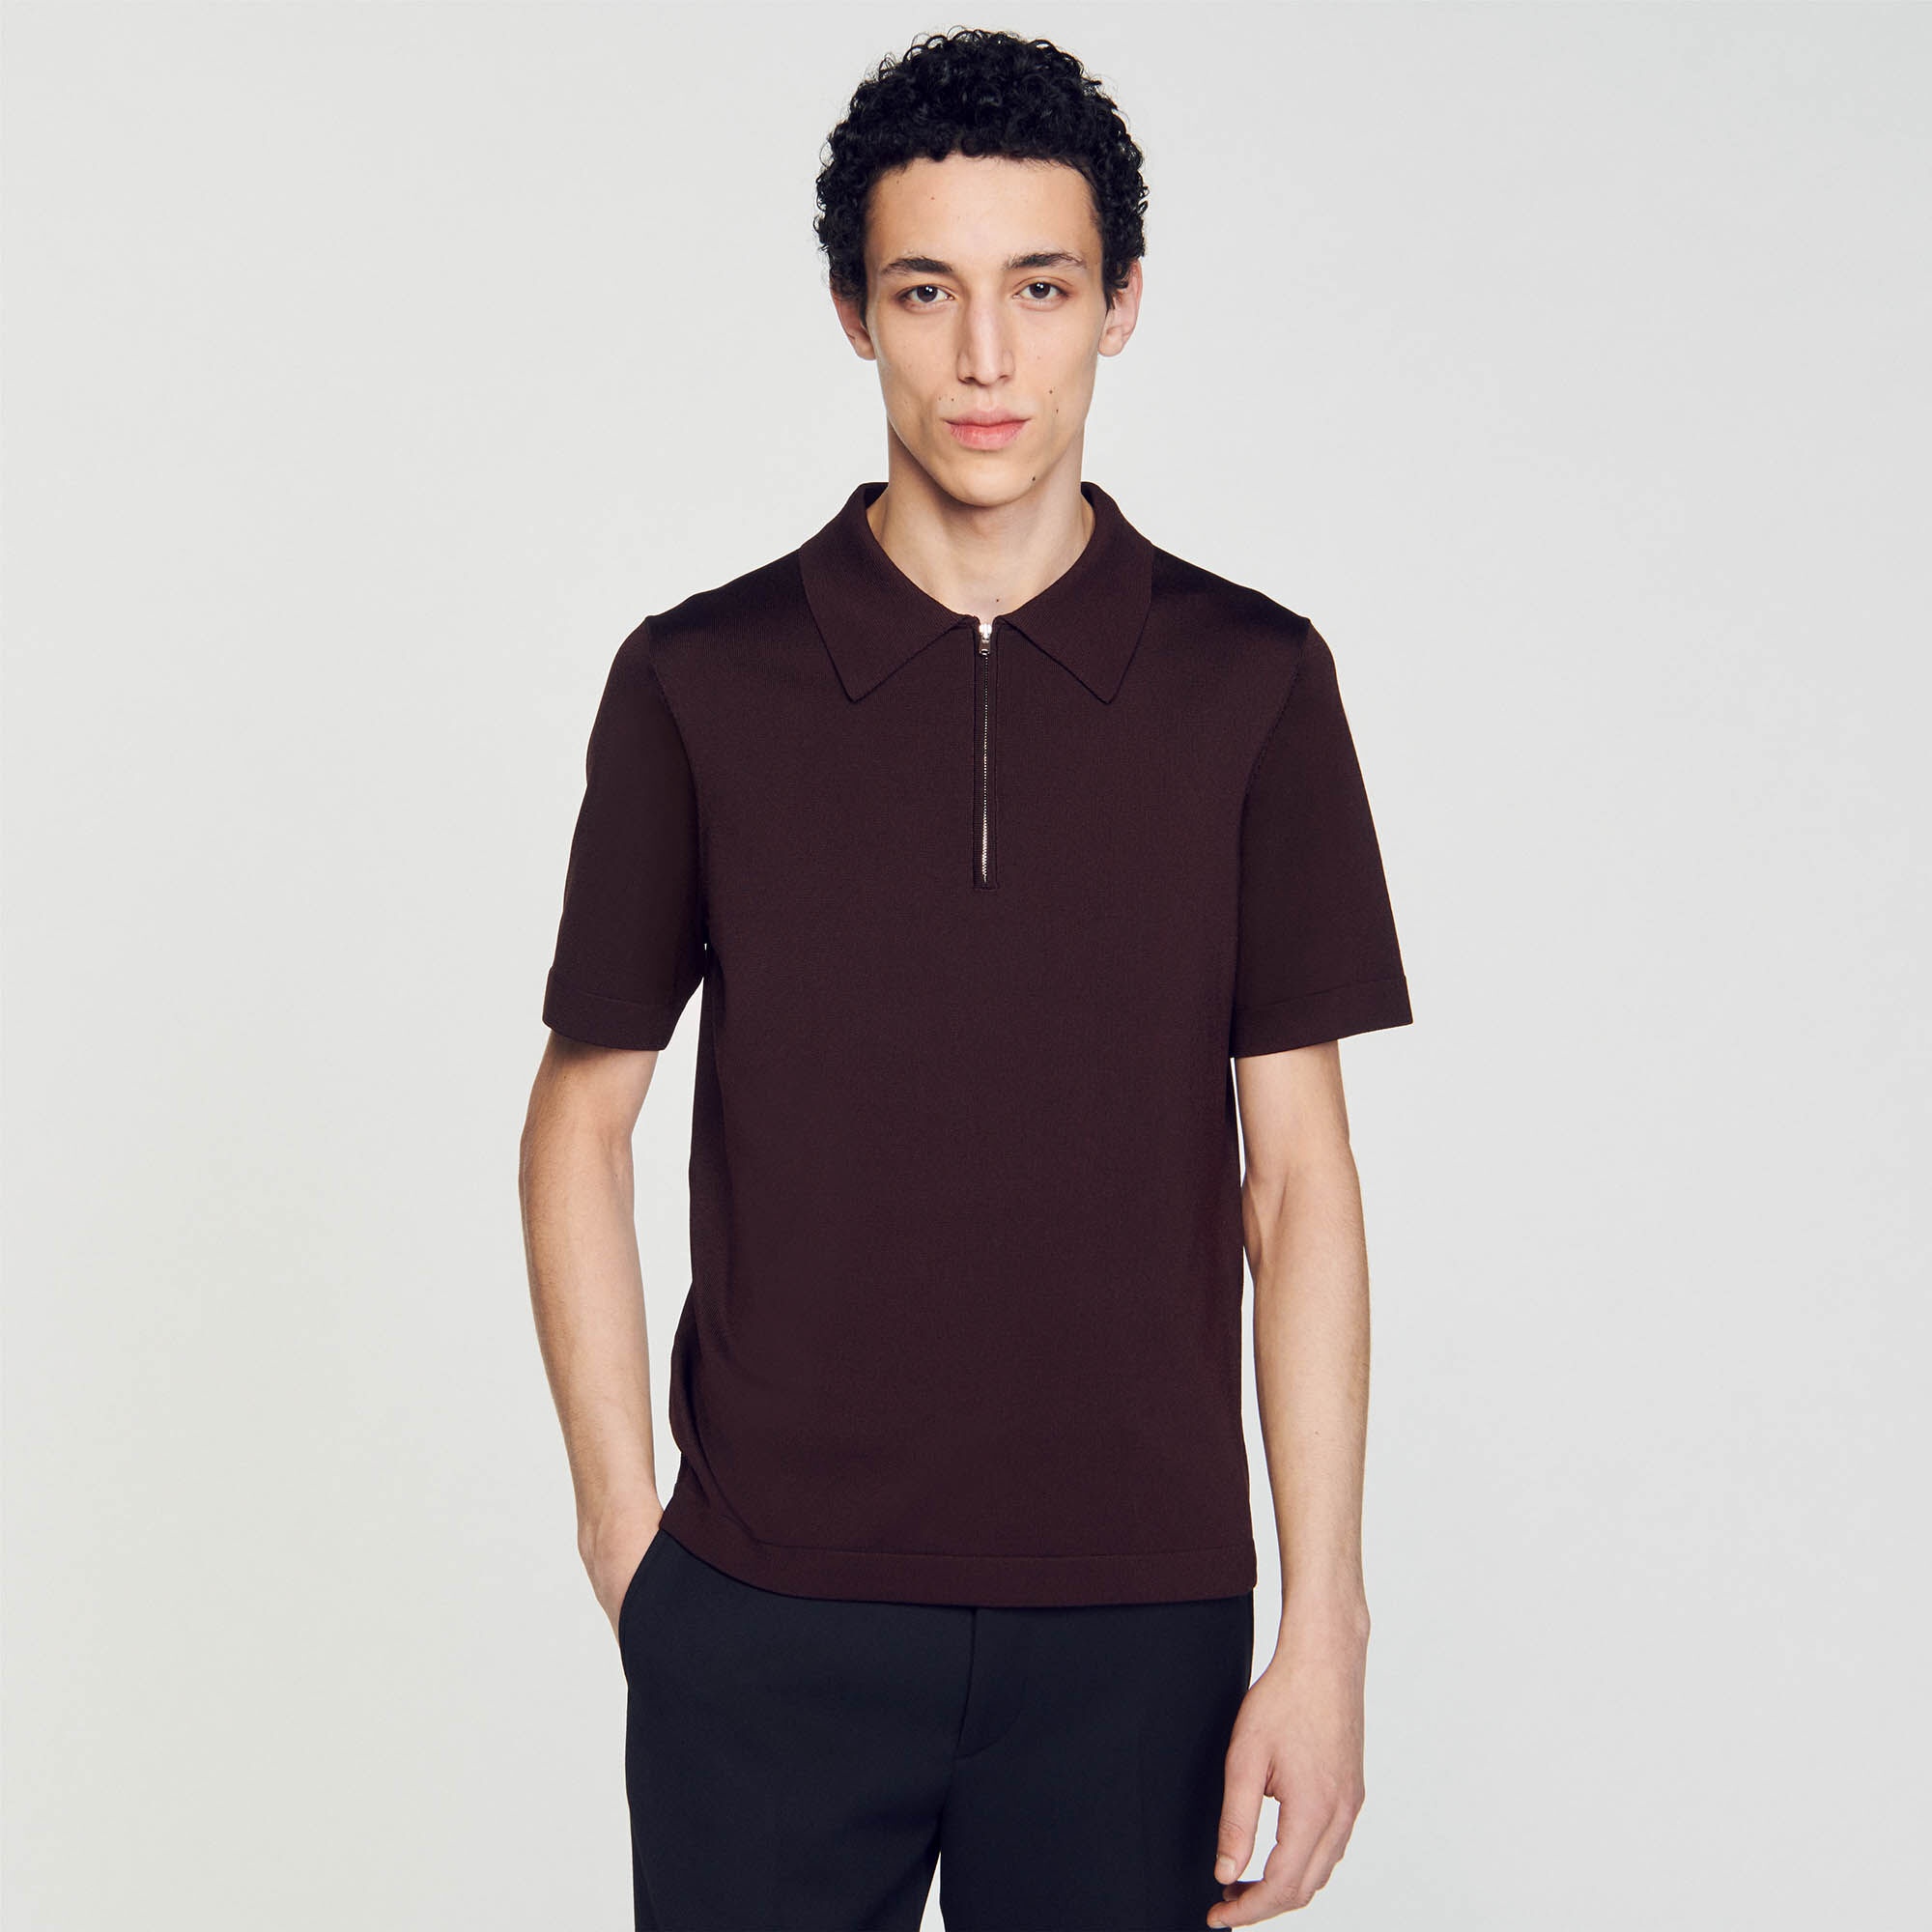 KNITTED POLO SHIRT WITH ZIP COLLAR - 5